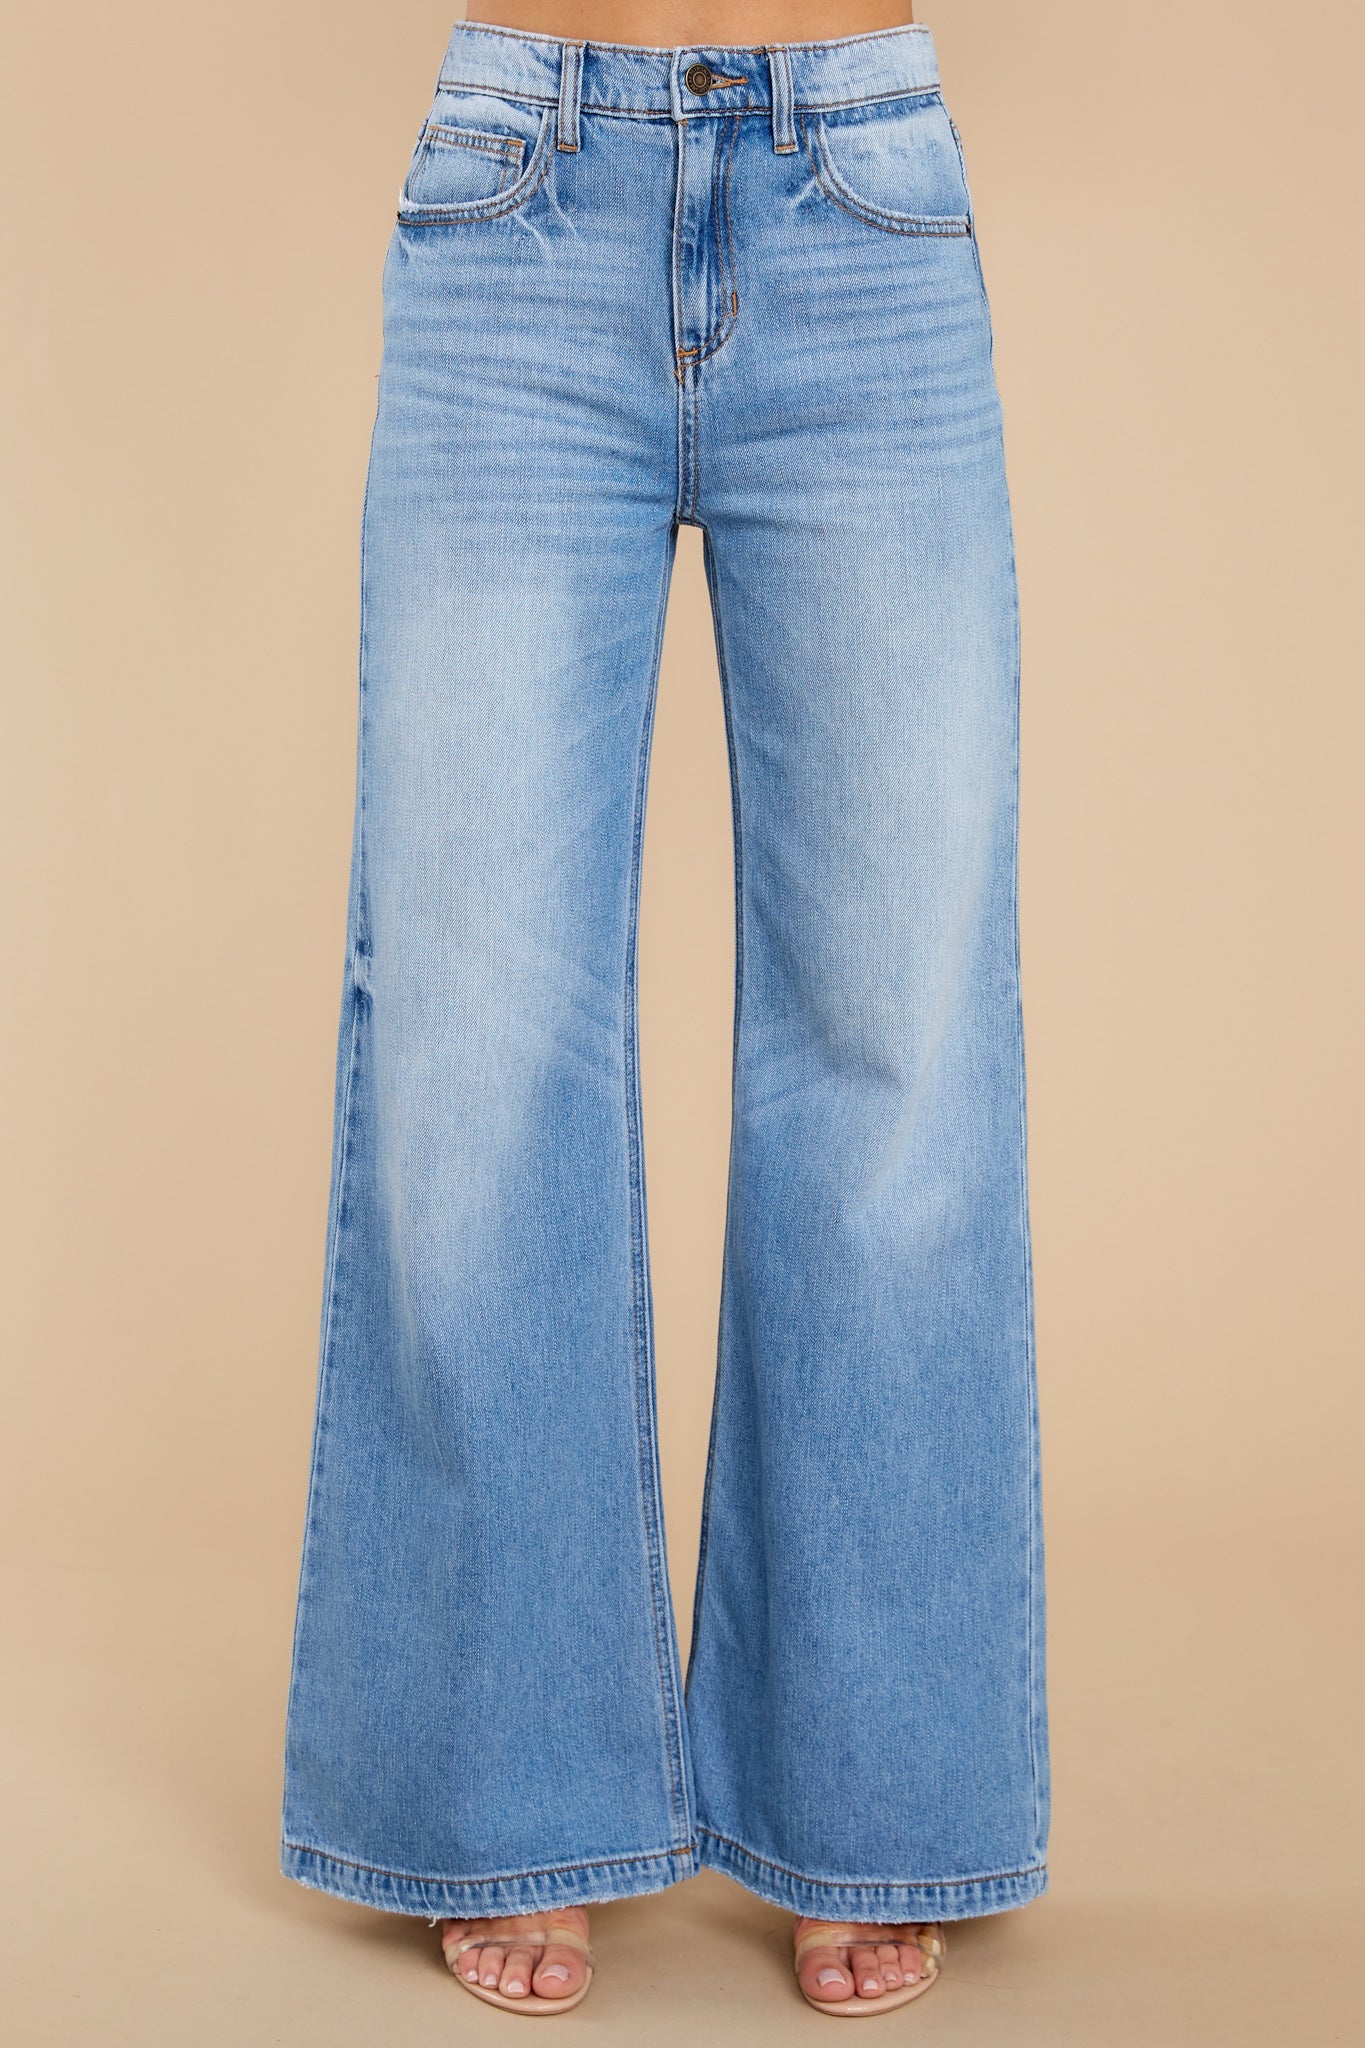 Another Jam Session Medium Wash Wide Leg Jeans - Red Dress